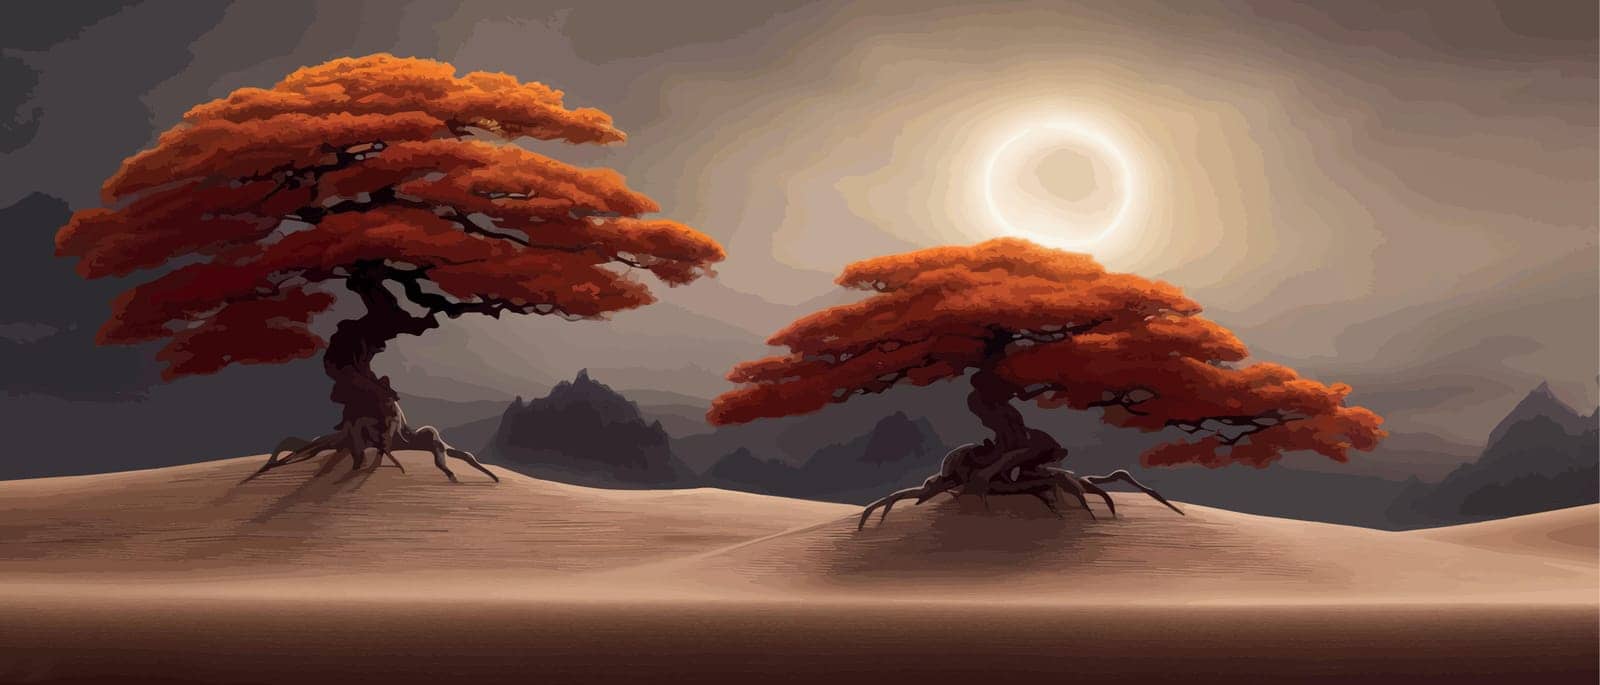 A gloomy autumn orange tree in desert against backdrop mountains and hills in a fantasy world. Vector illustration